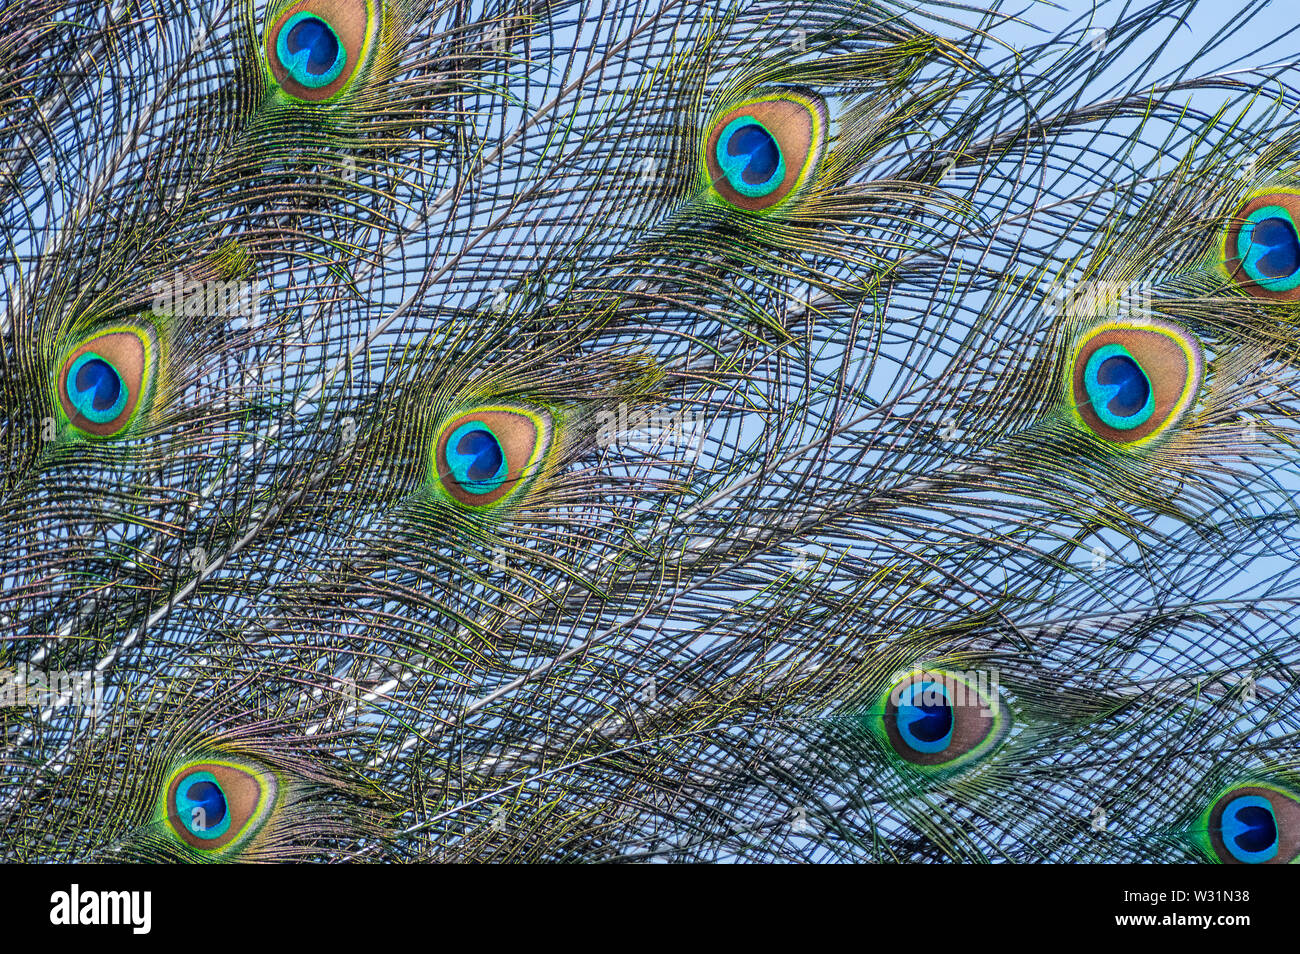 Image of Indian Peacock tail feathers with eyespots background. Stock Photo